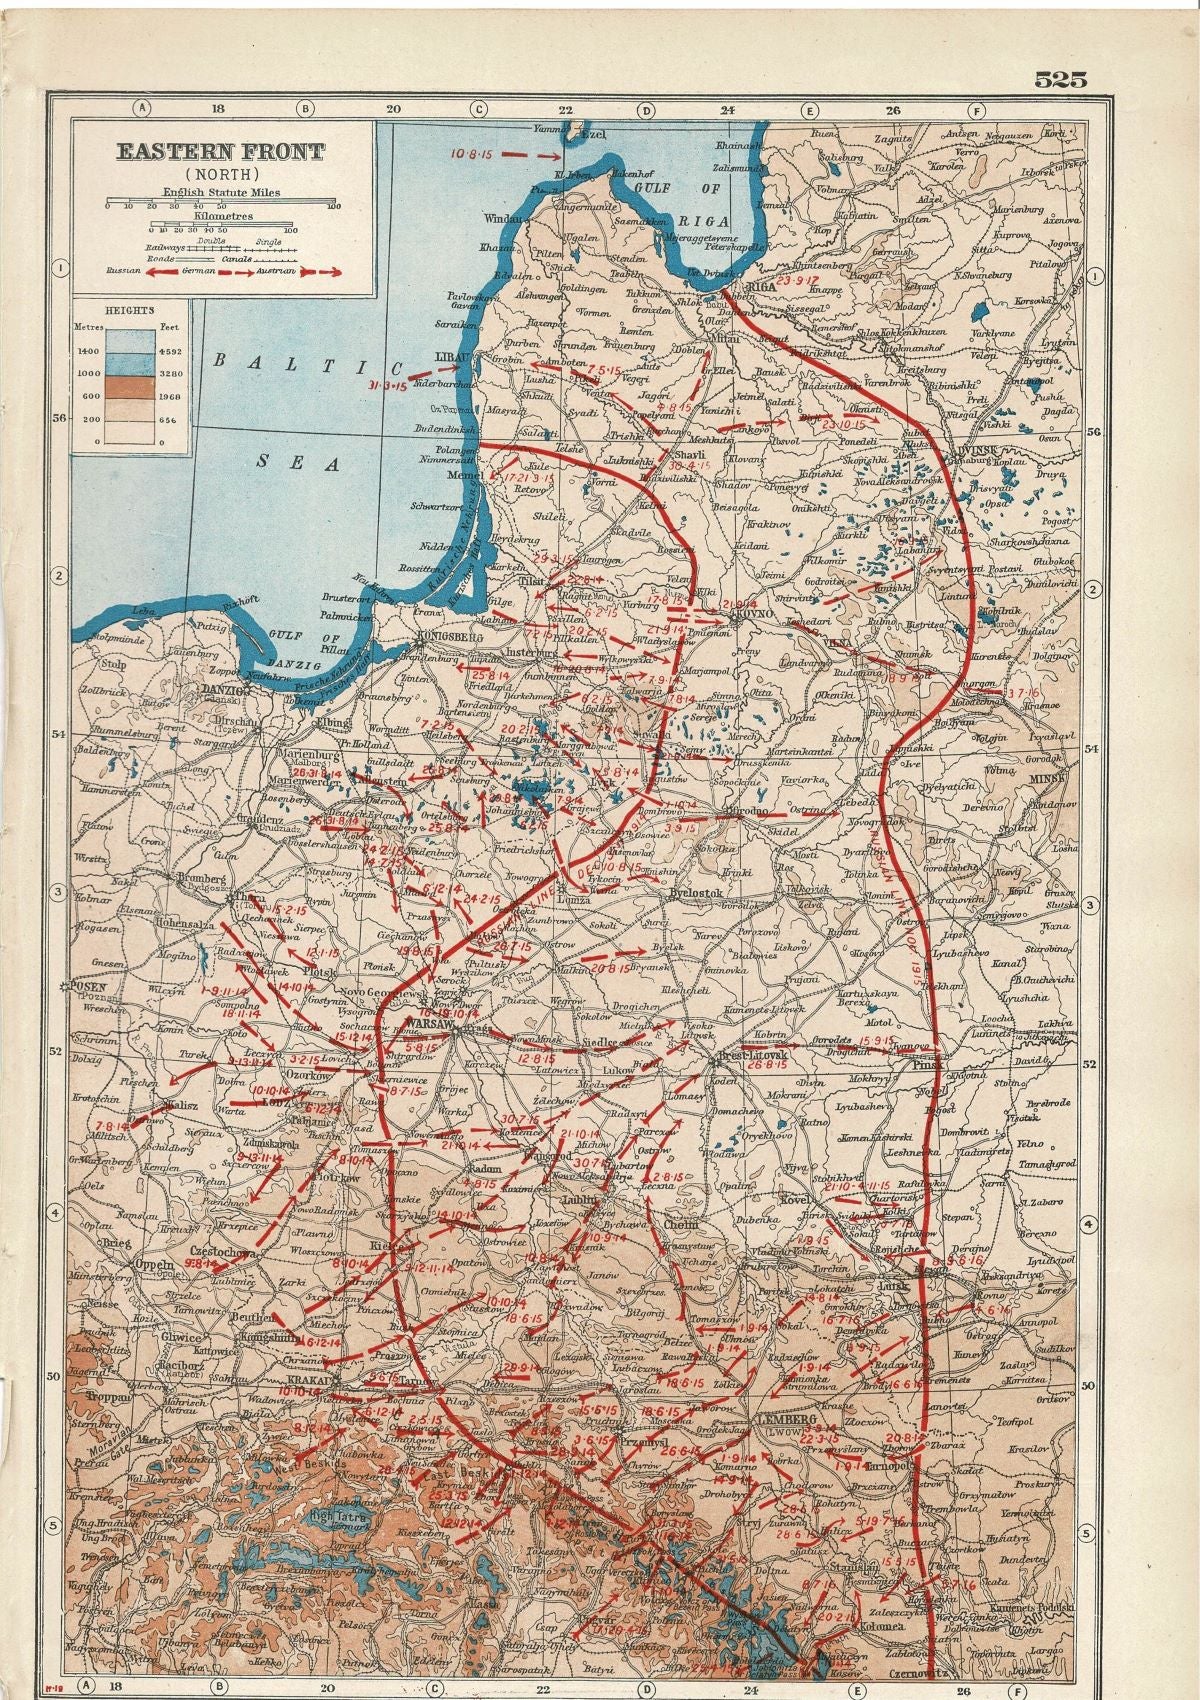 Eastern Front (North), An Atlas of the Great War, published 1920